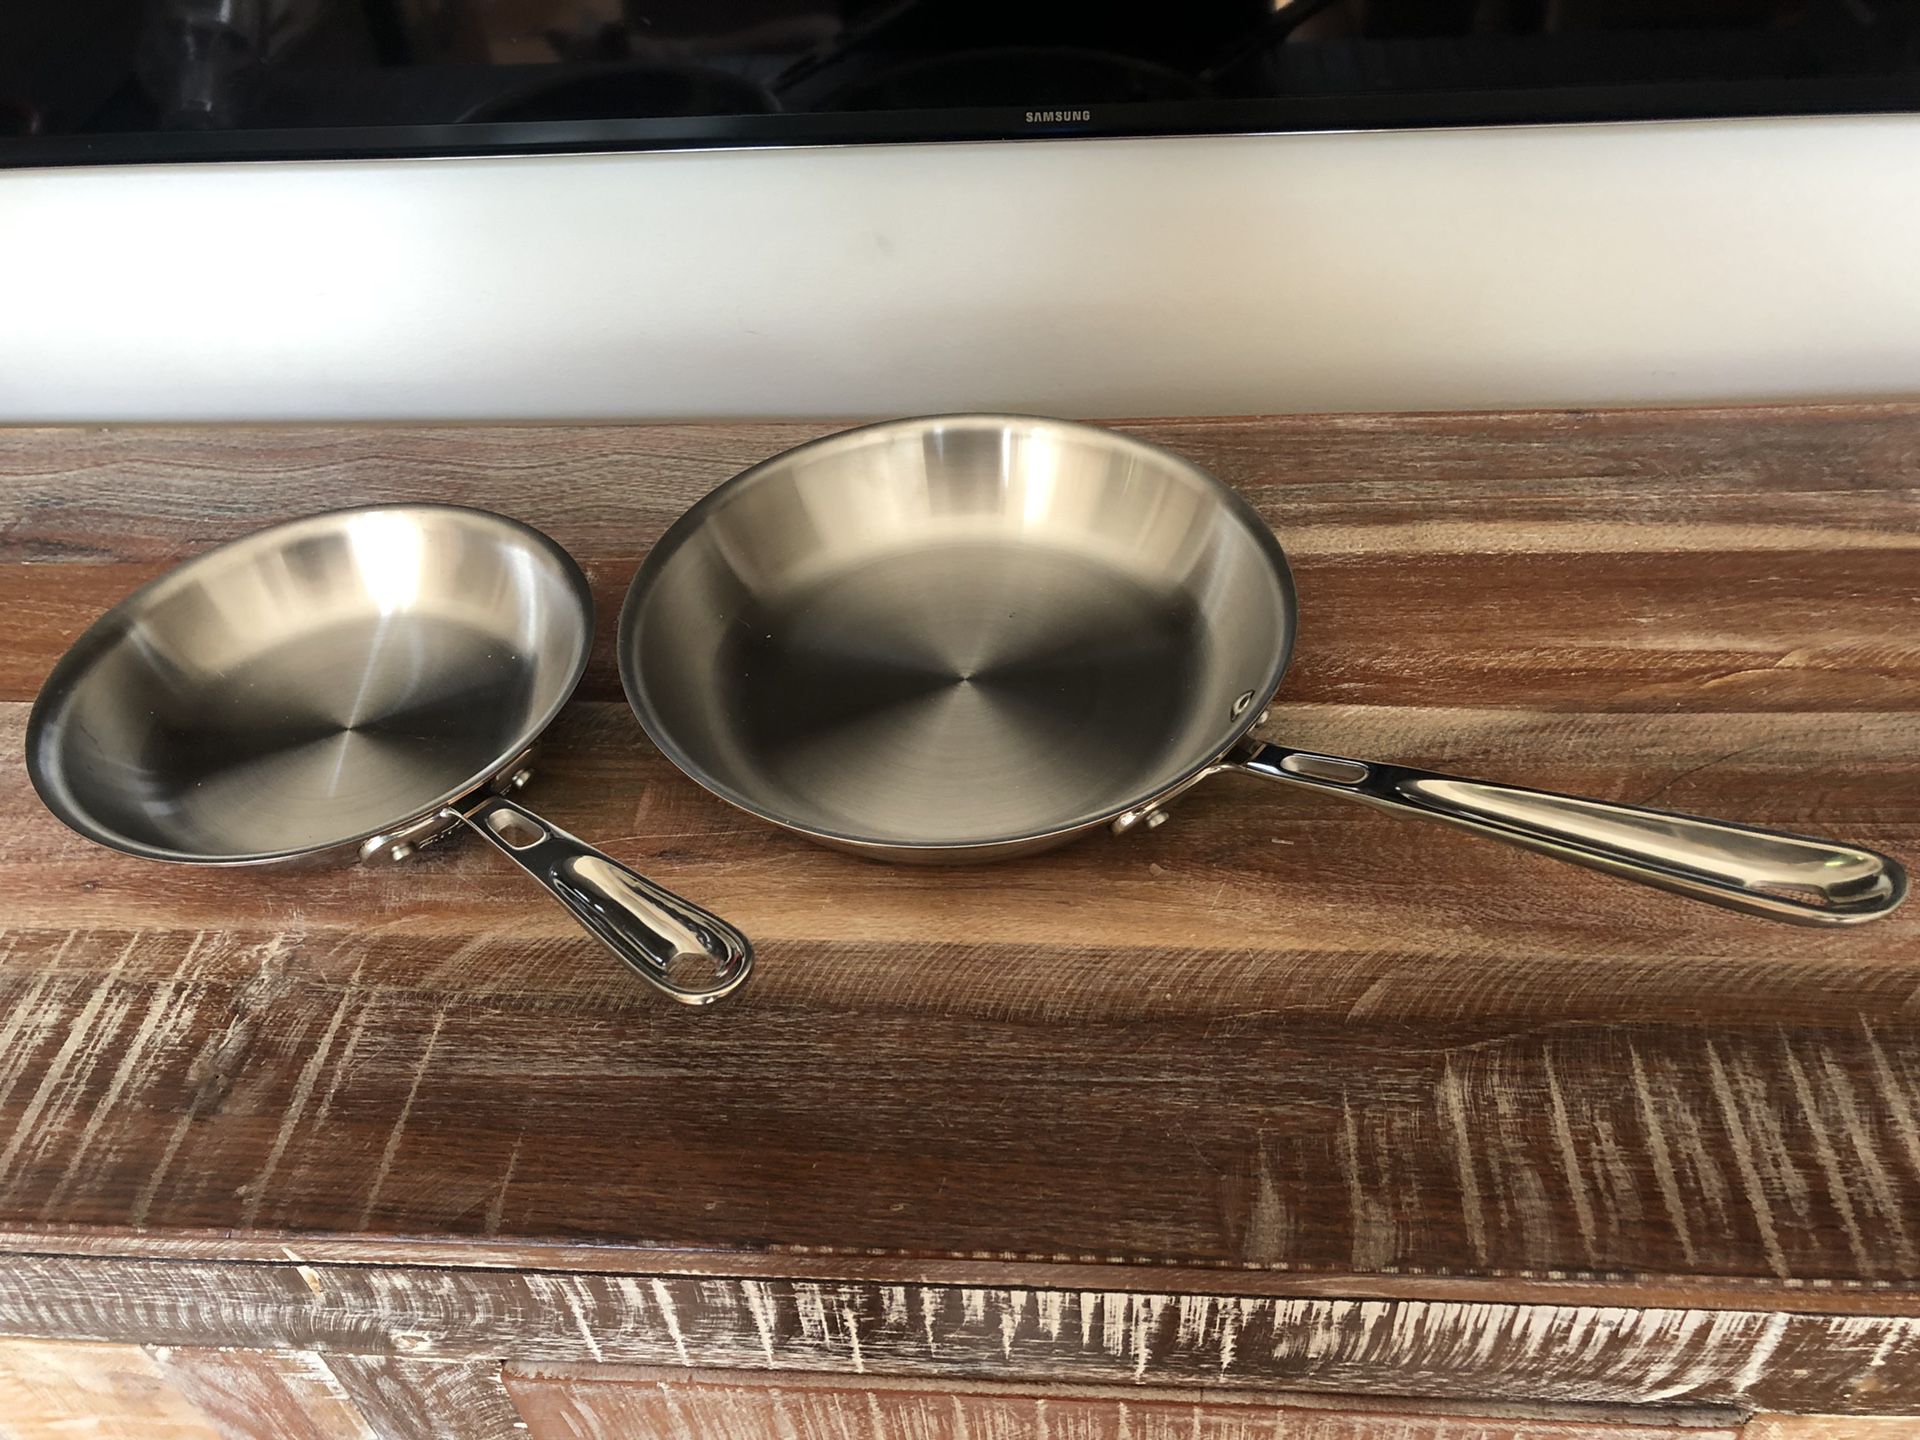 2 All-Clad Copper Core Frying Pans, barely used